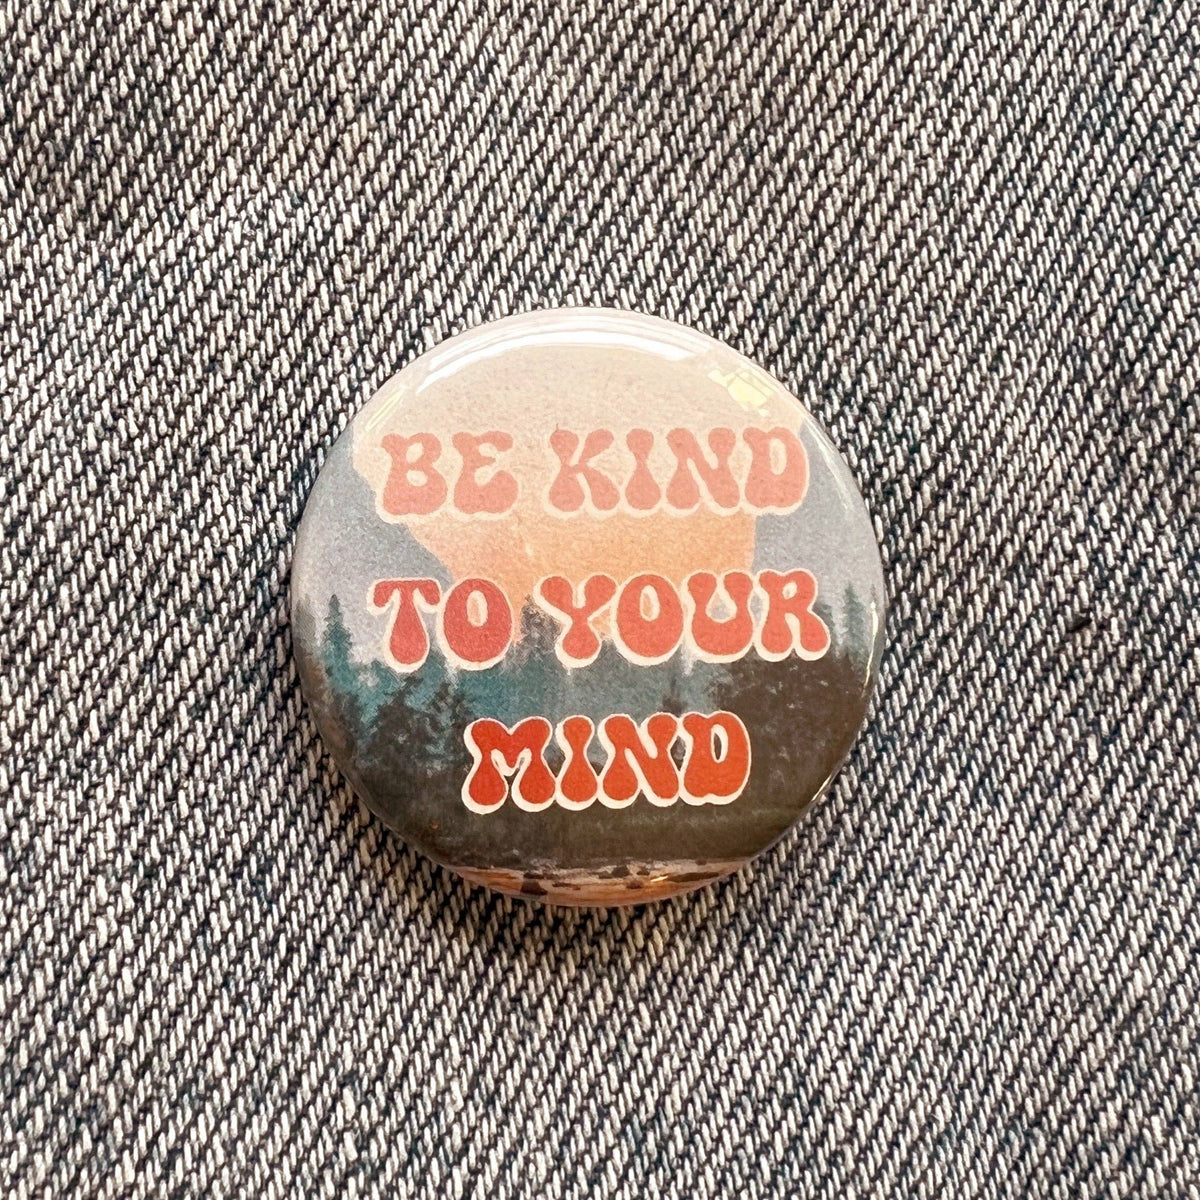 Positivity Button Pins: Be Kind - pink/purple